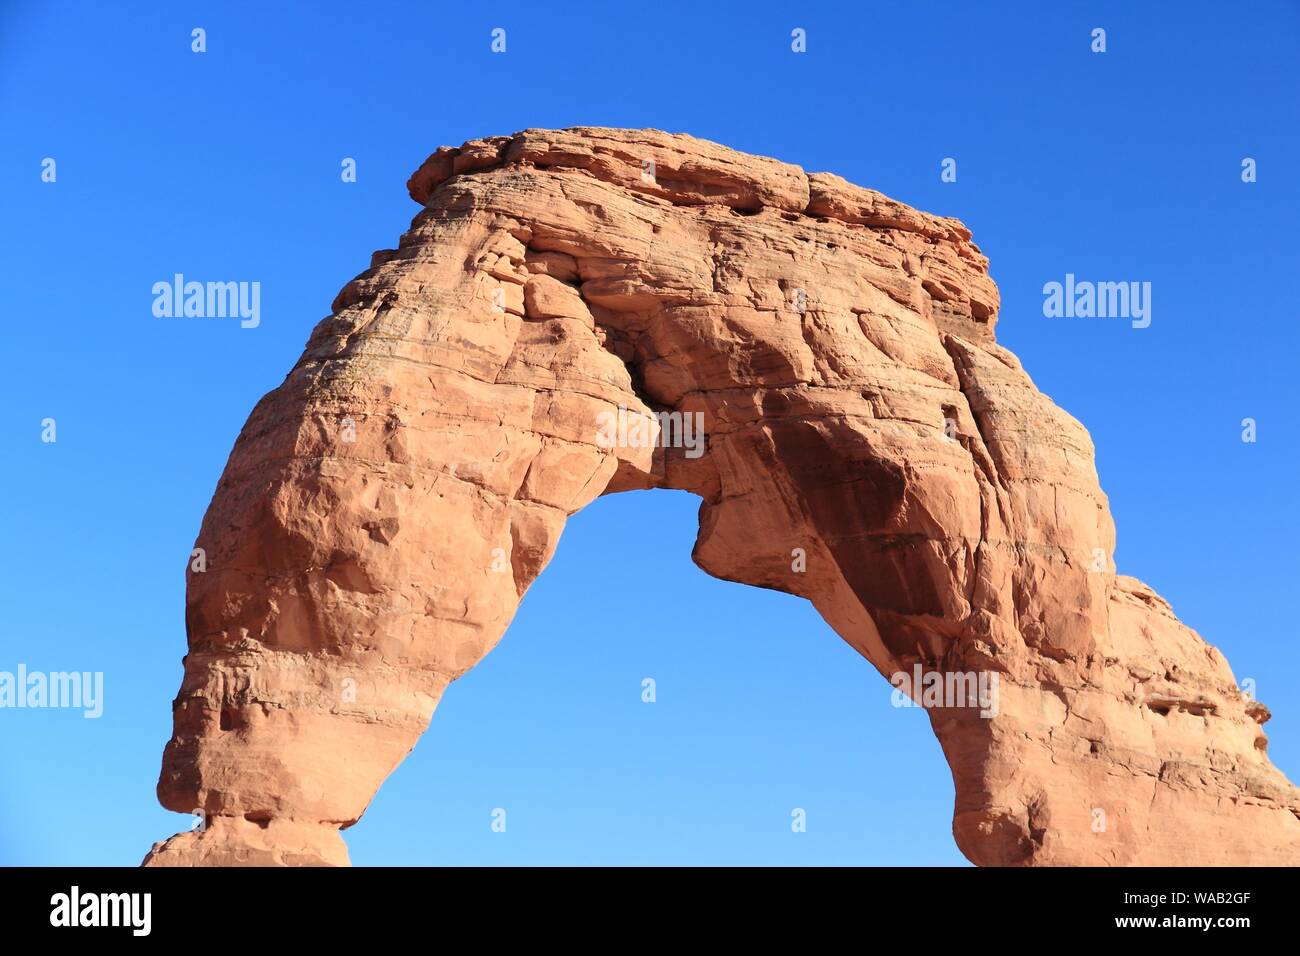 Arches National Park in Utah, USA. Delicate Arch rock formation. Stock Photo